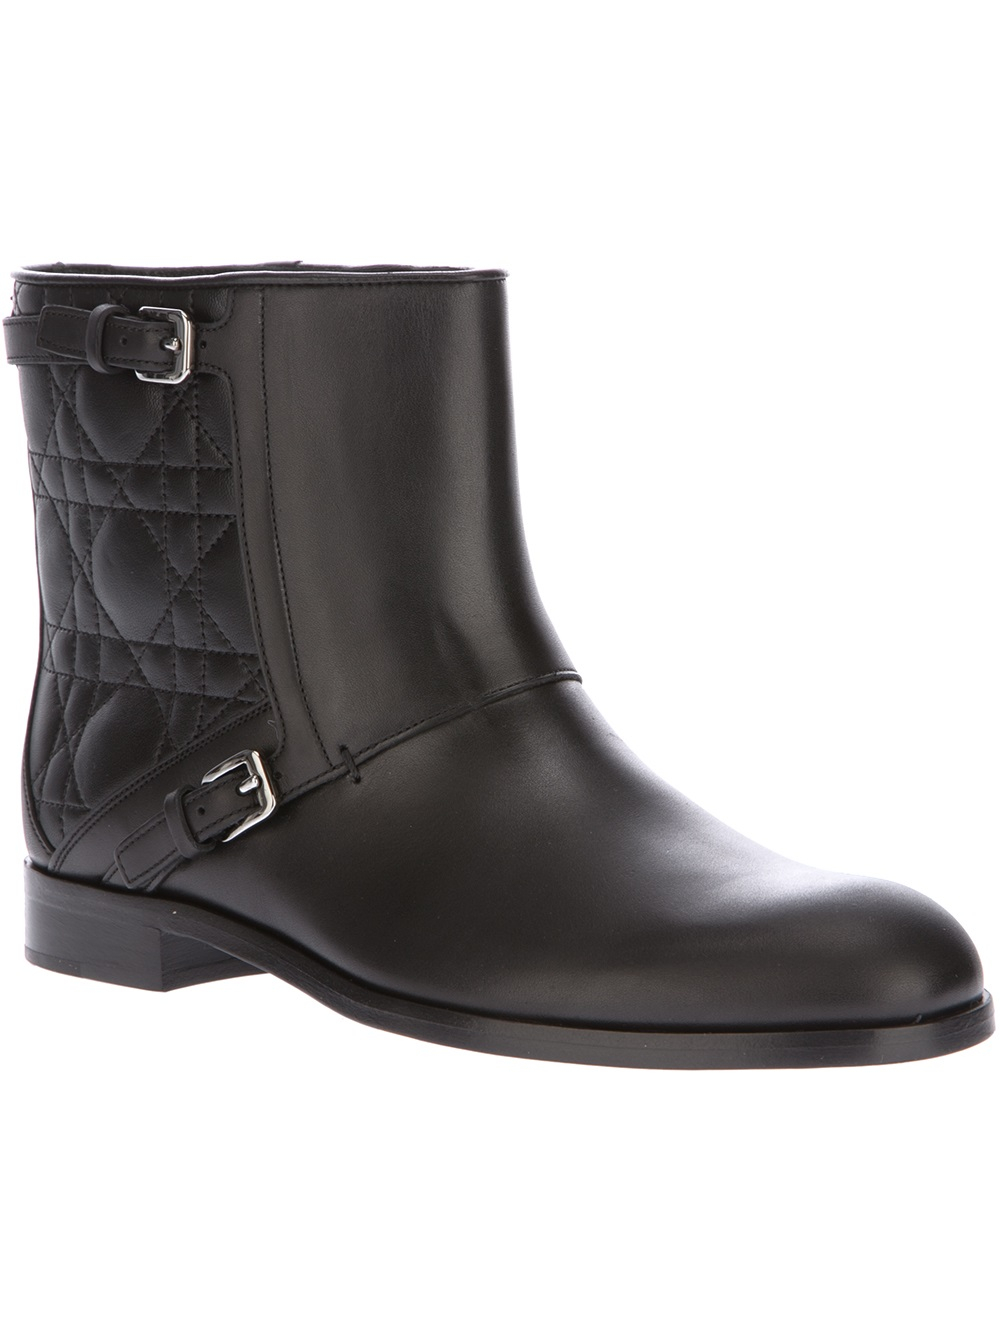 Dior City Cannage Boot in Black - Lyst